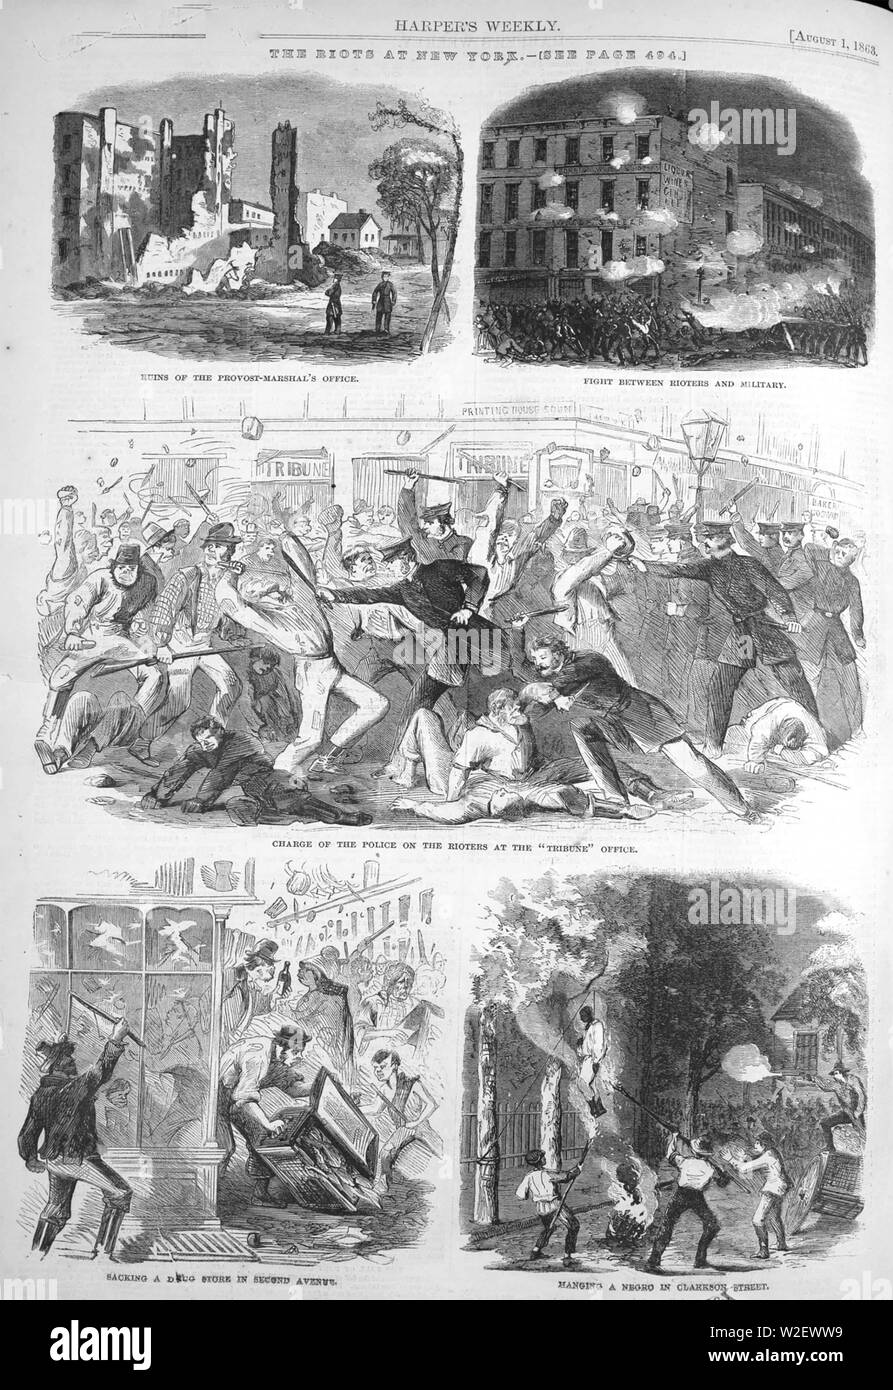 NEW YORK RIOTS  13-16 July 1863 in response to laws to draft men into the Union army for the Civil War Stock Photo